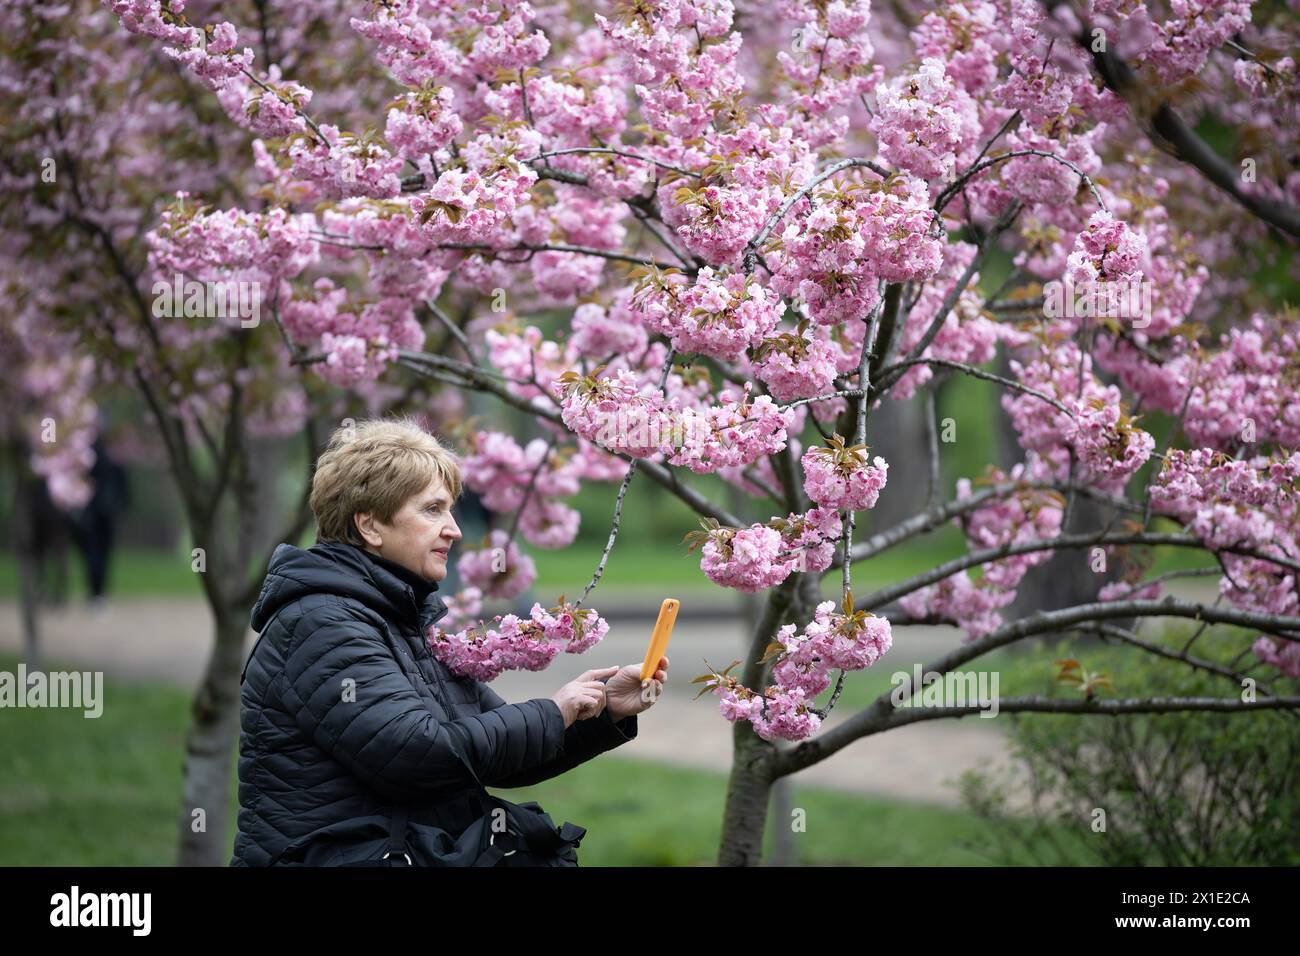 A woman takes a photo of sakura blossoms in Kyoto Park in Kyiv. Stock Photo